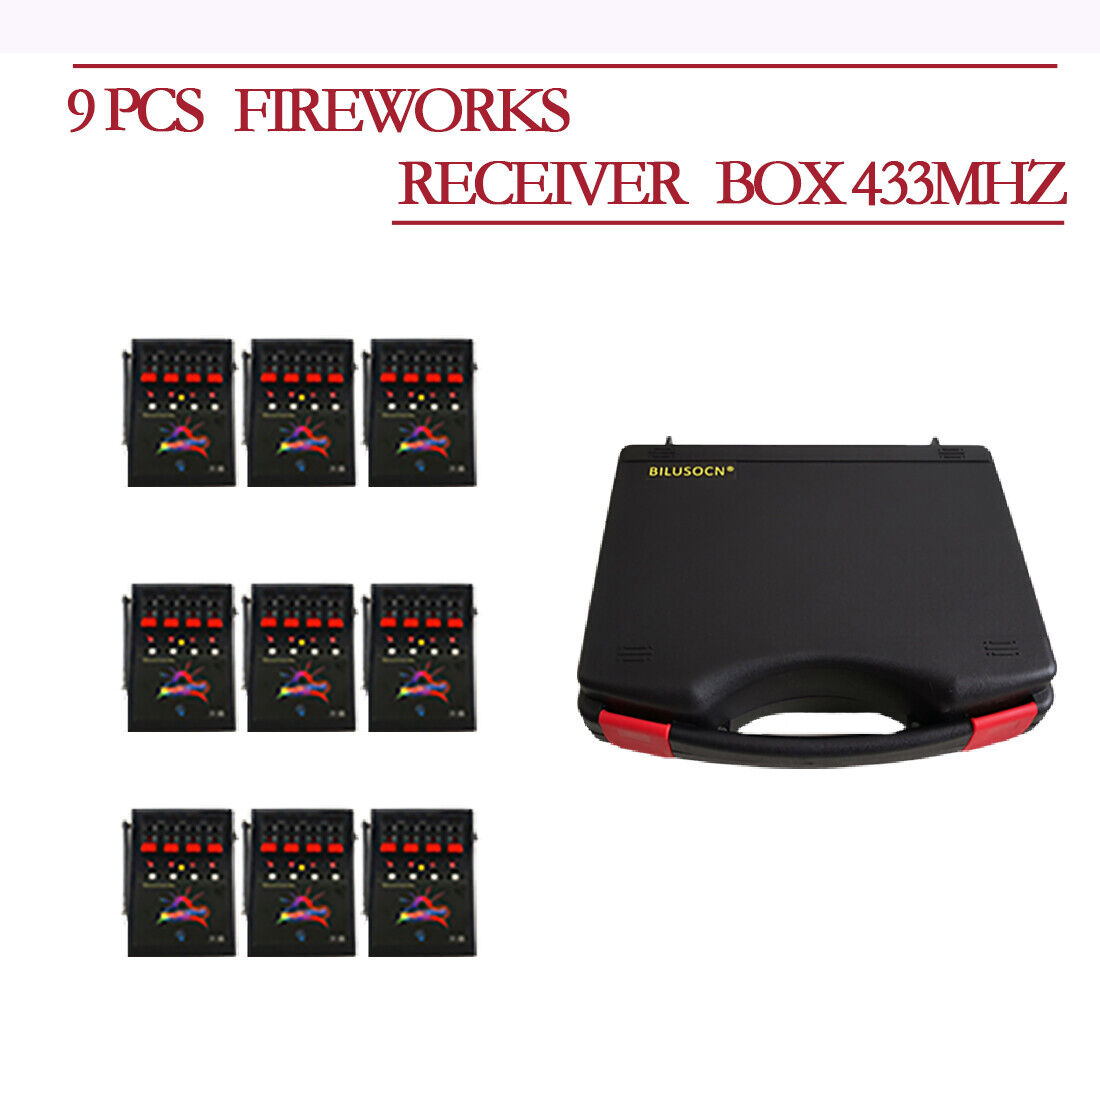 9 PCS 4 cues receiver box 433MHZ for fireworks firing system